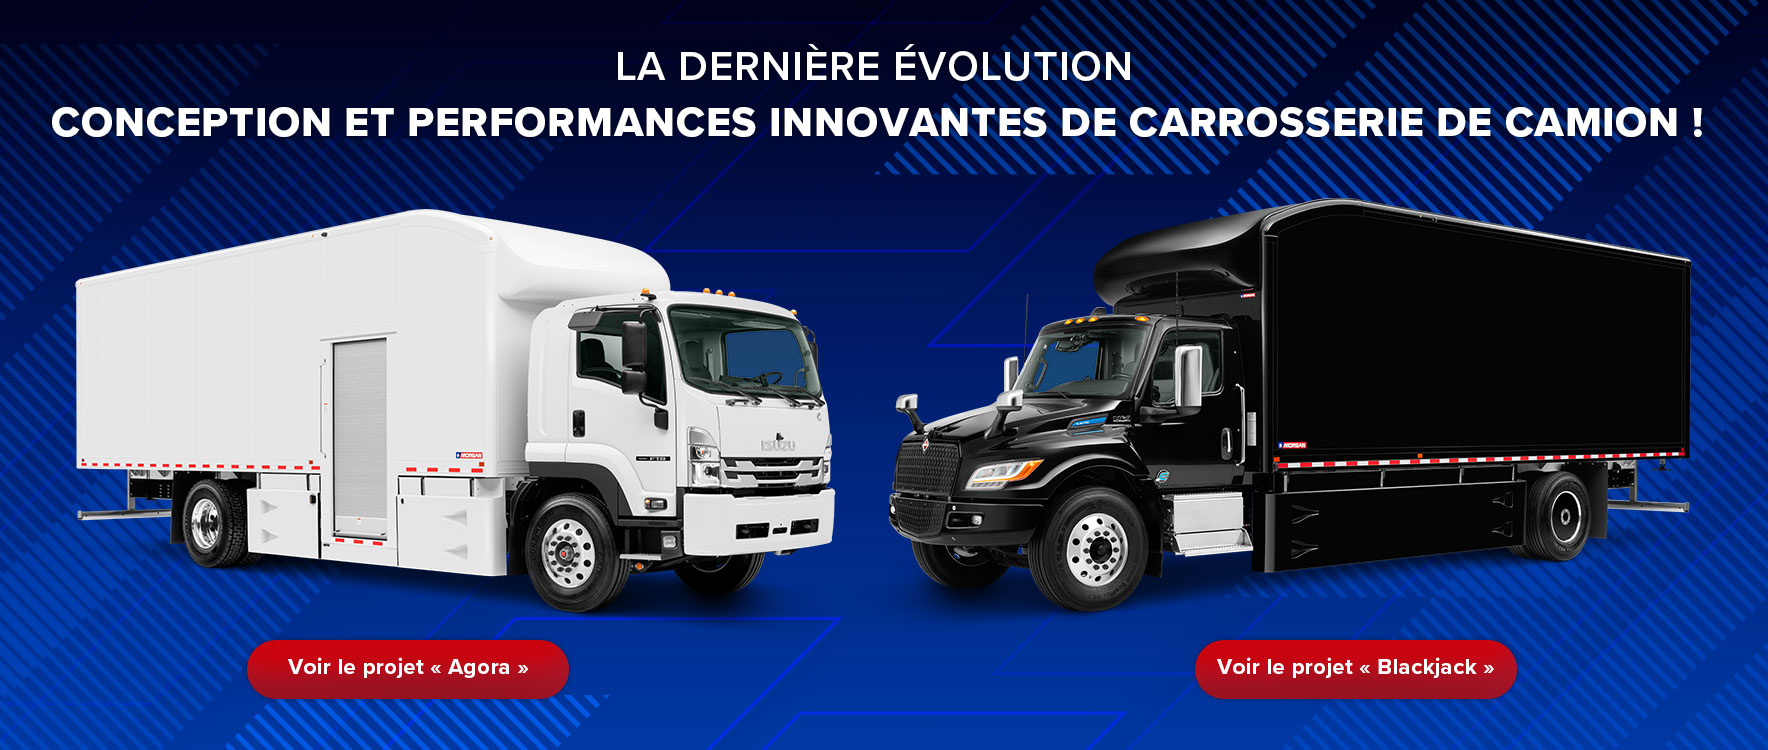 The latest evolution in innovative truck body design and performance with project Agora and Blackjack!